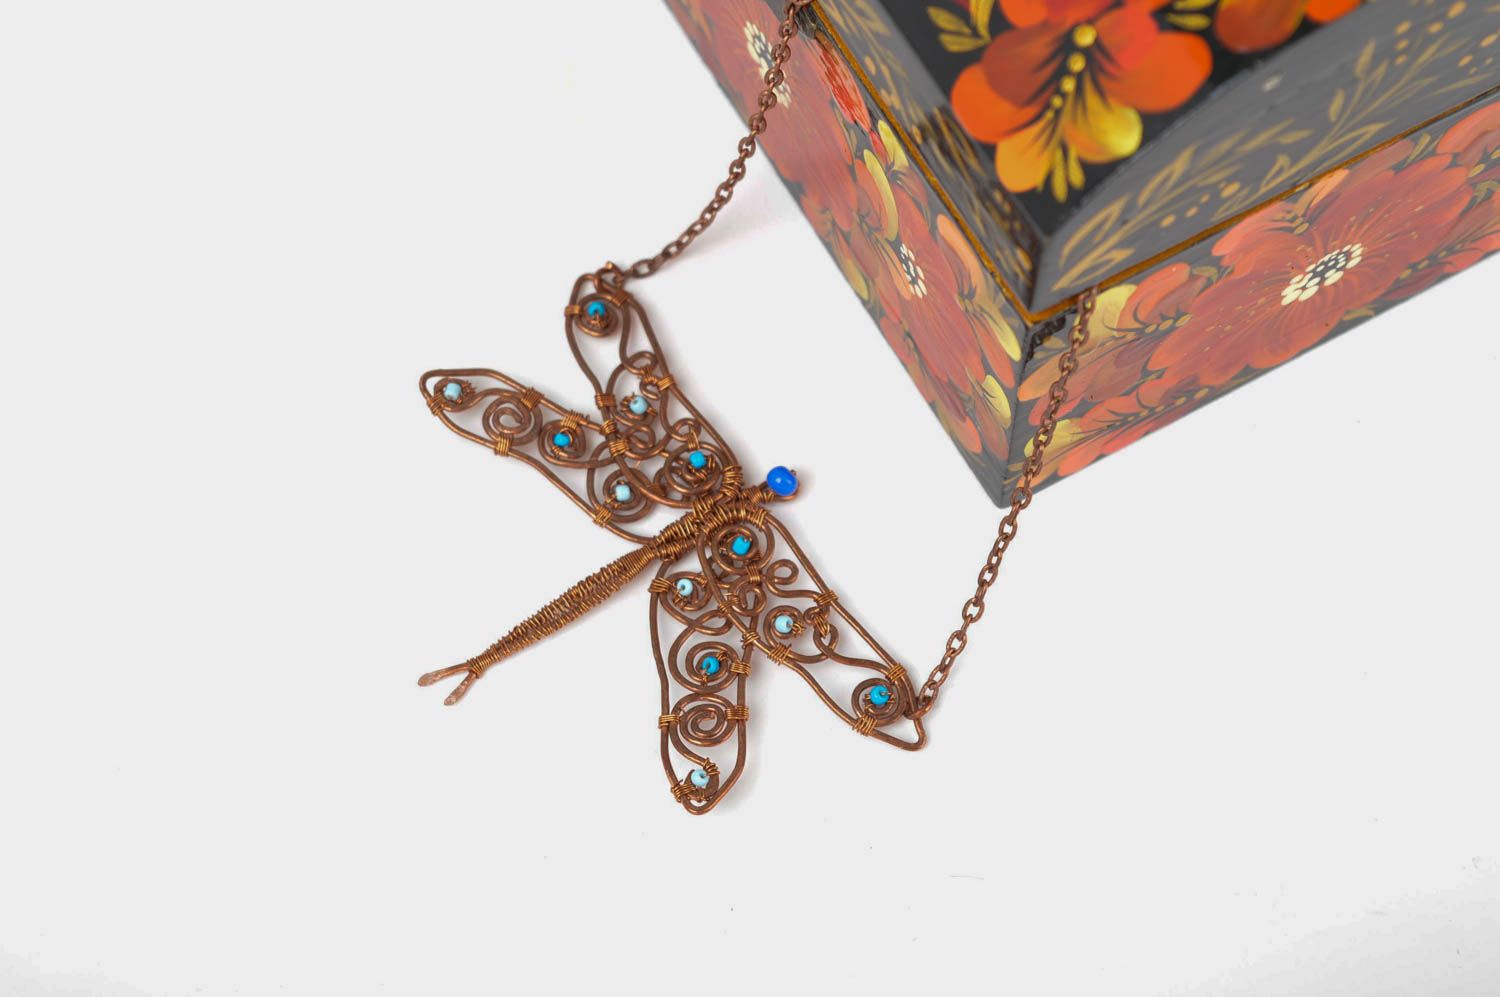 Handmade jewelry metal necklace copper pendant necklace dragonfly pendant photo 1